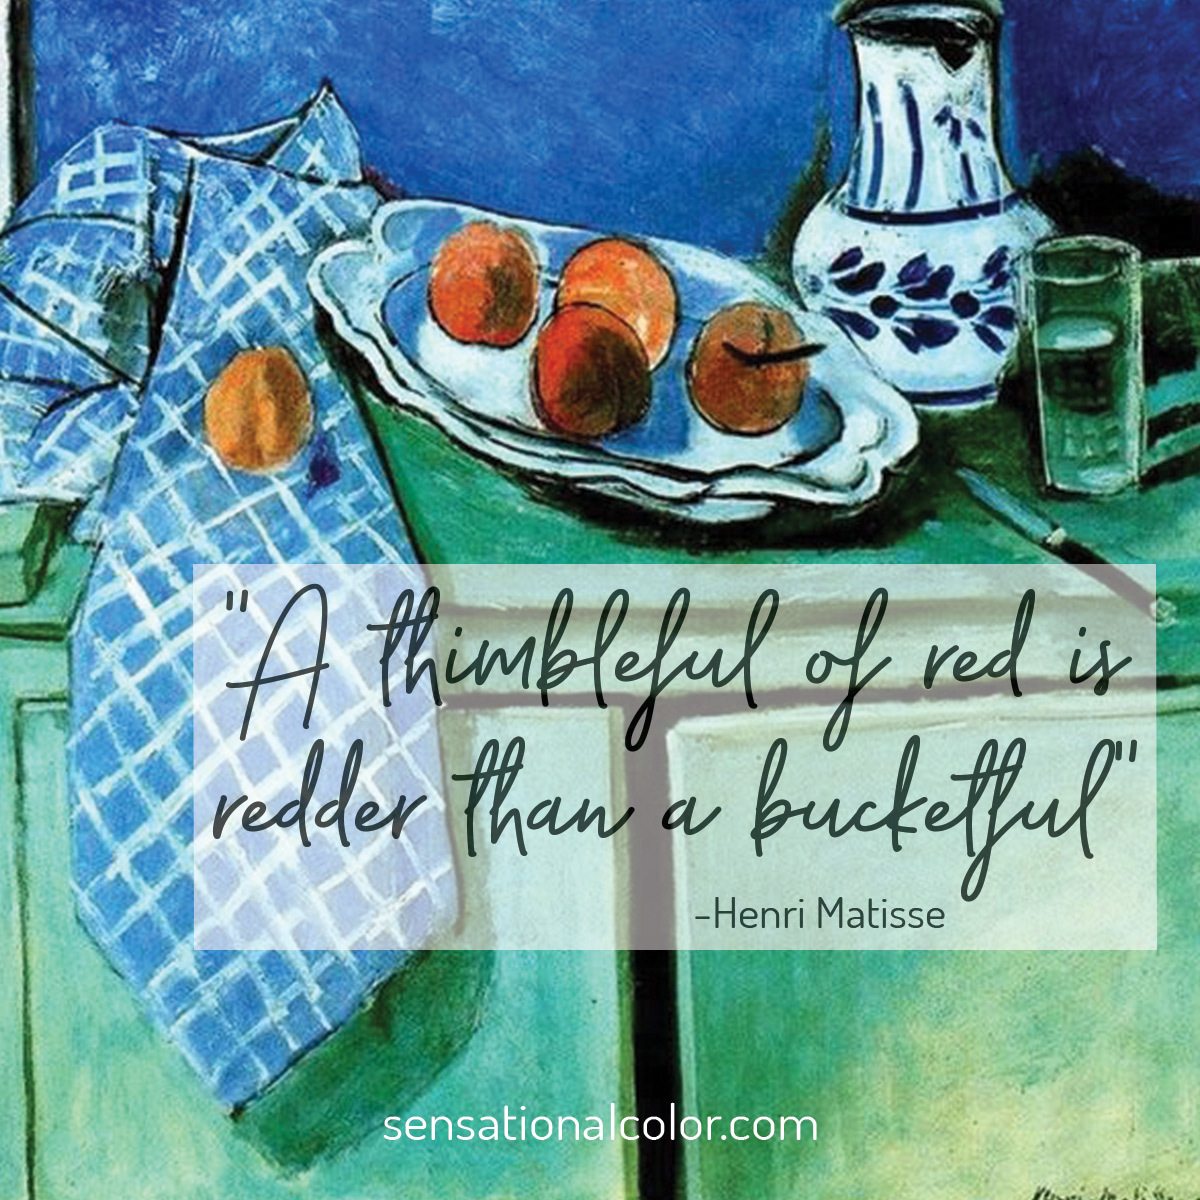 “A thimbleful of red is redder than a bucketful.”  -- Henri Matisse